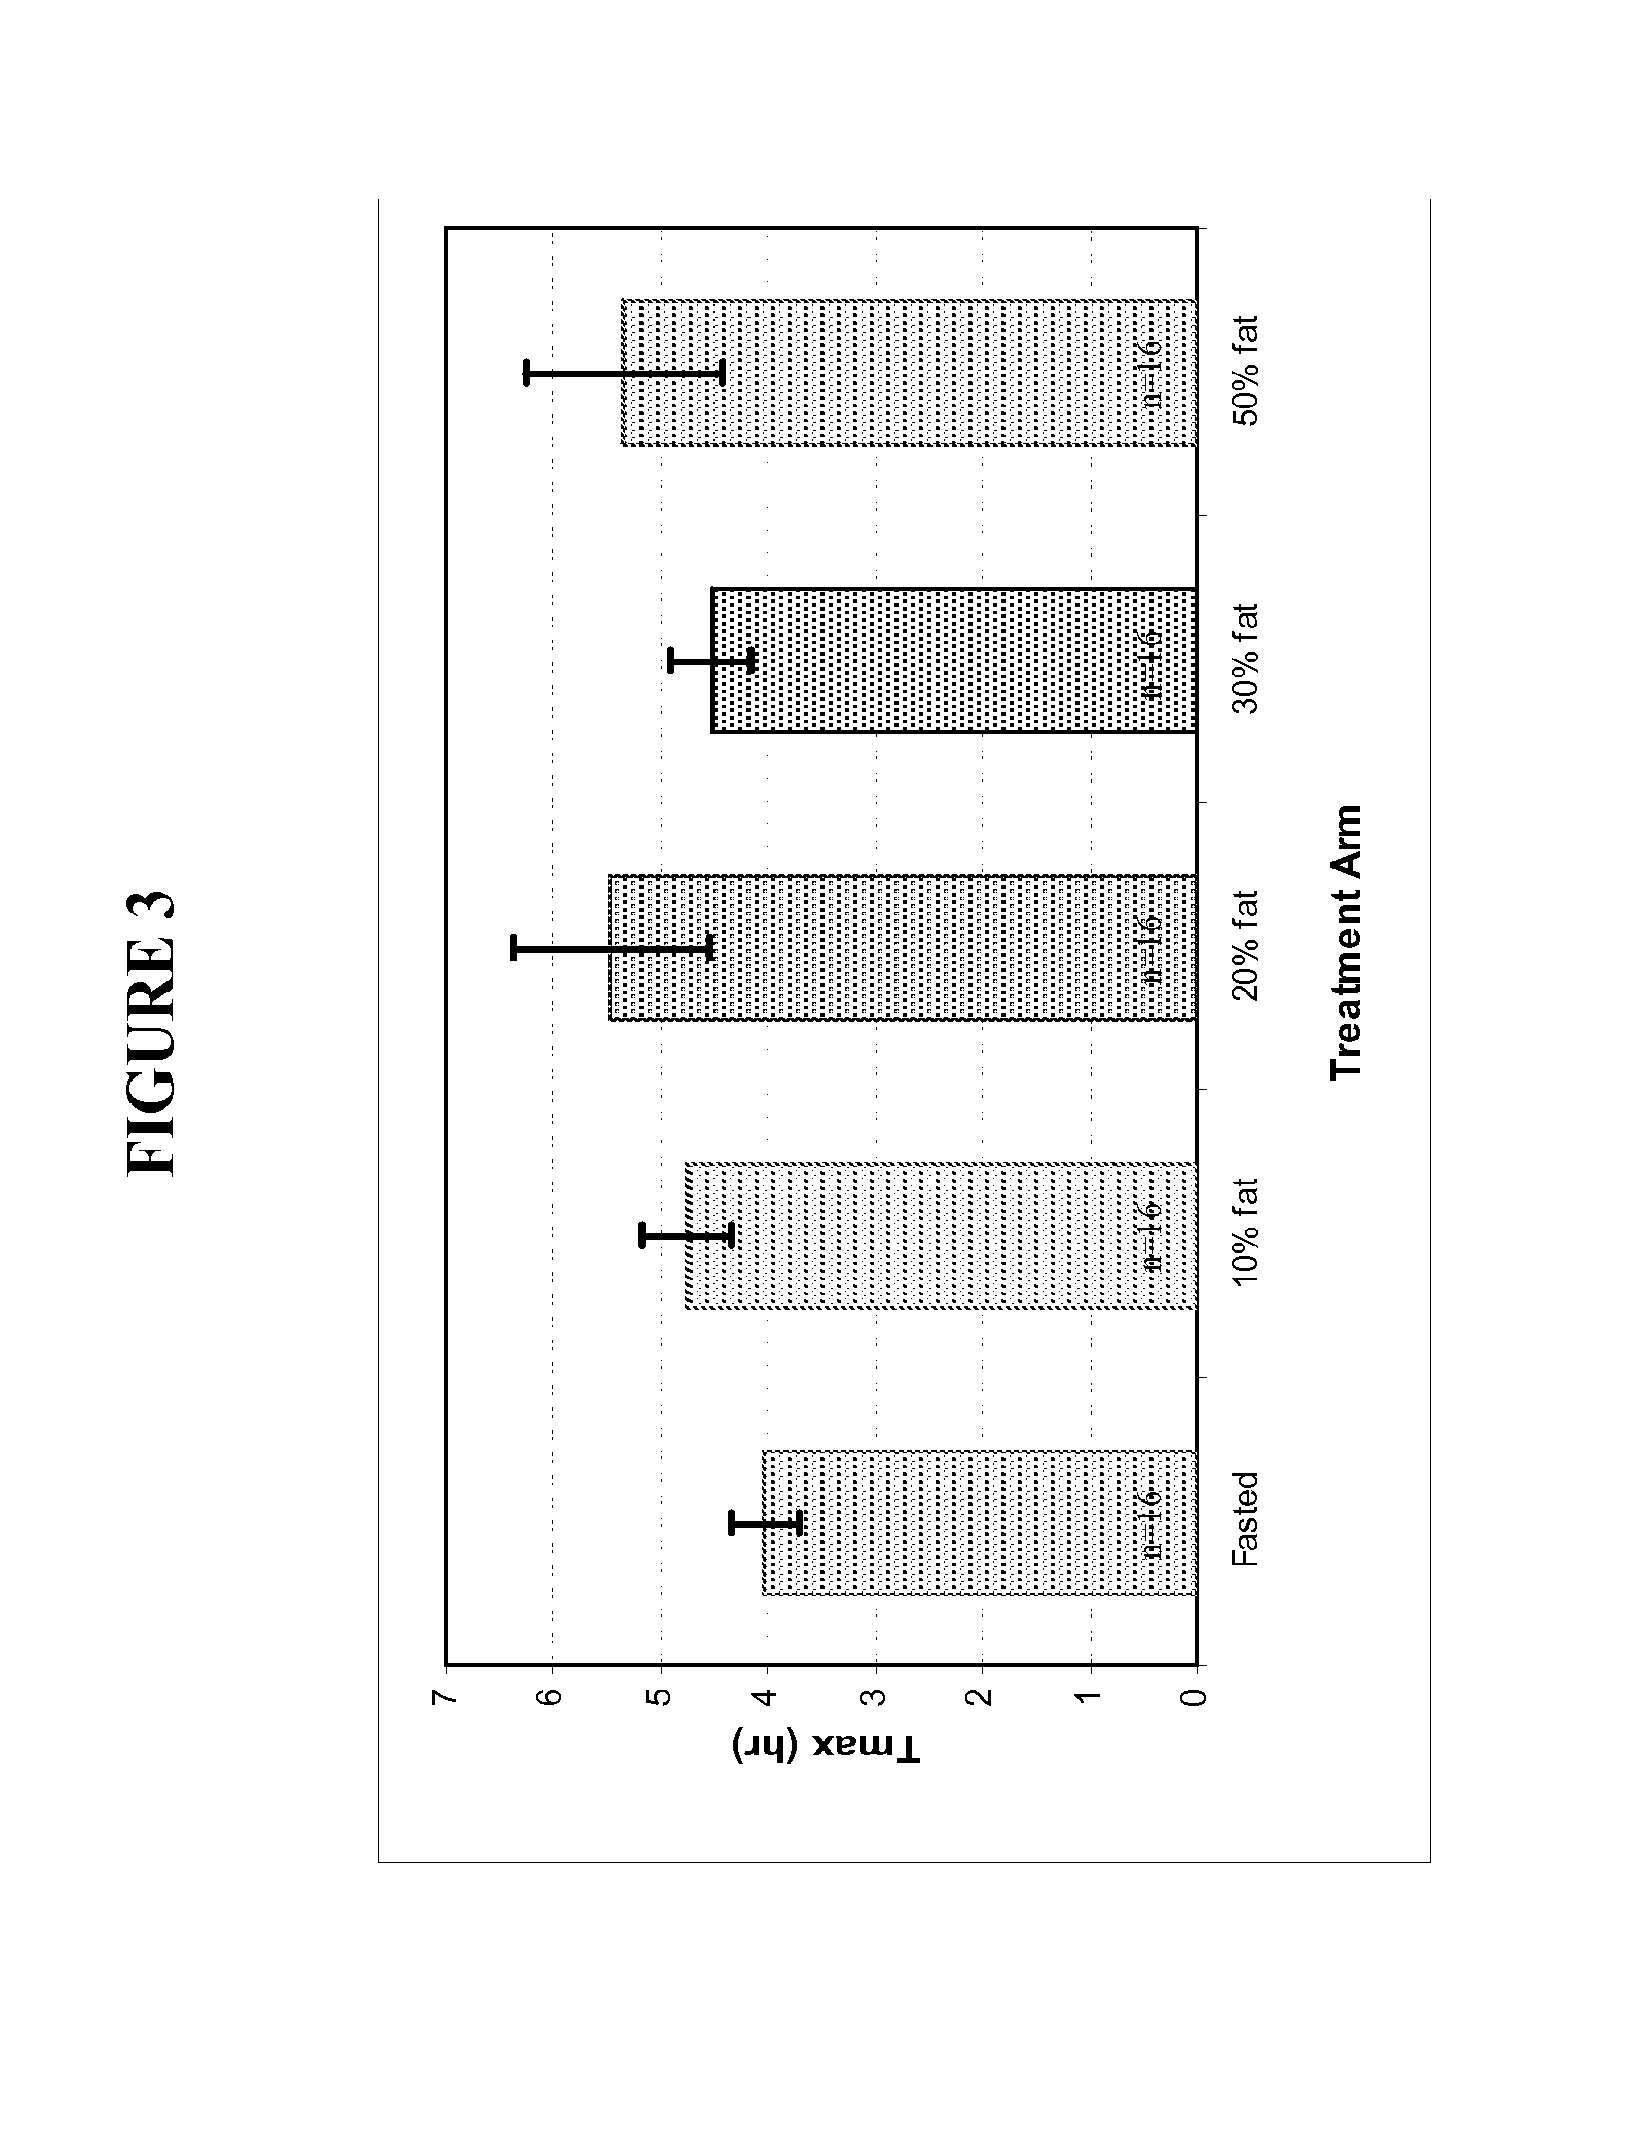 Oral testosterone ester formulations and methods of treating testosterone deficiency comprising same